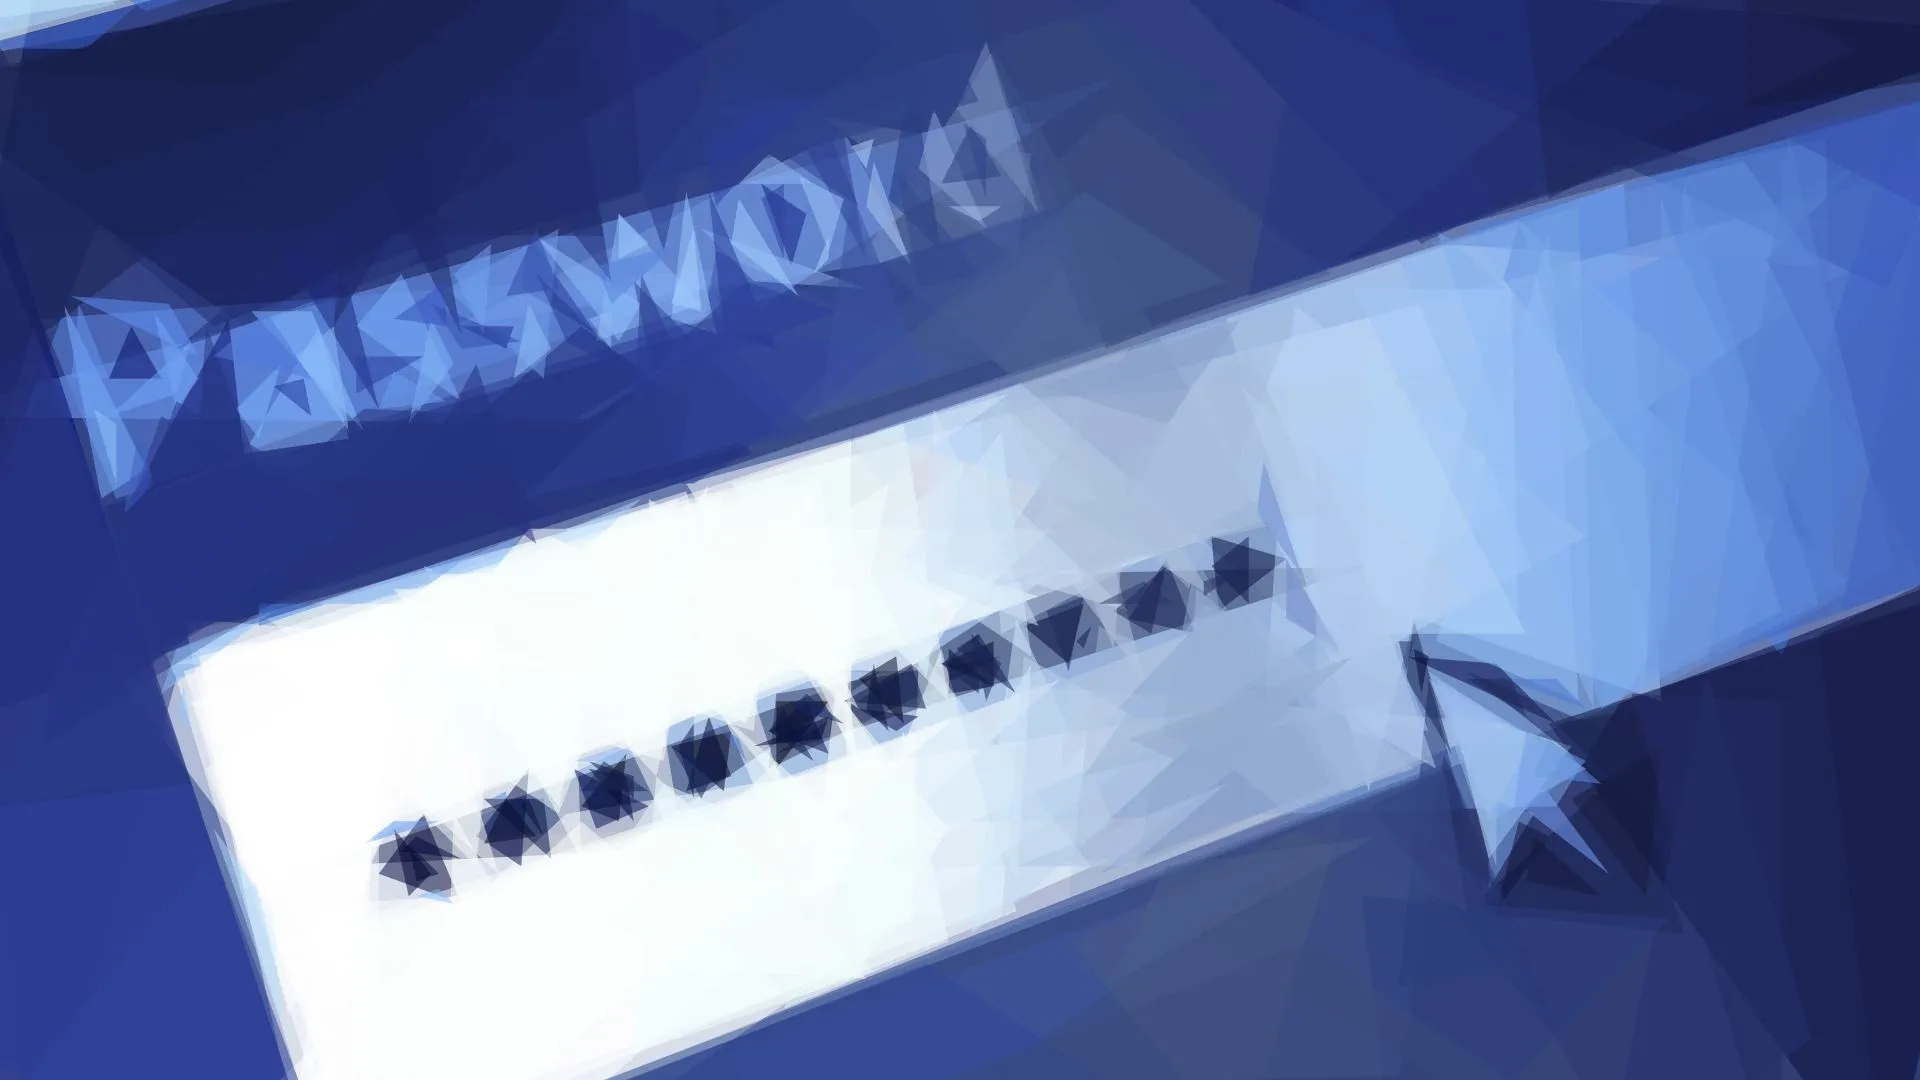 Workflow, Passwords, and More